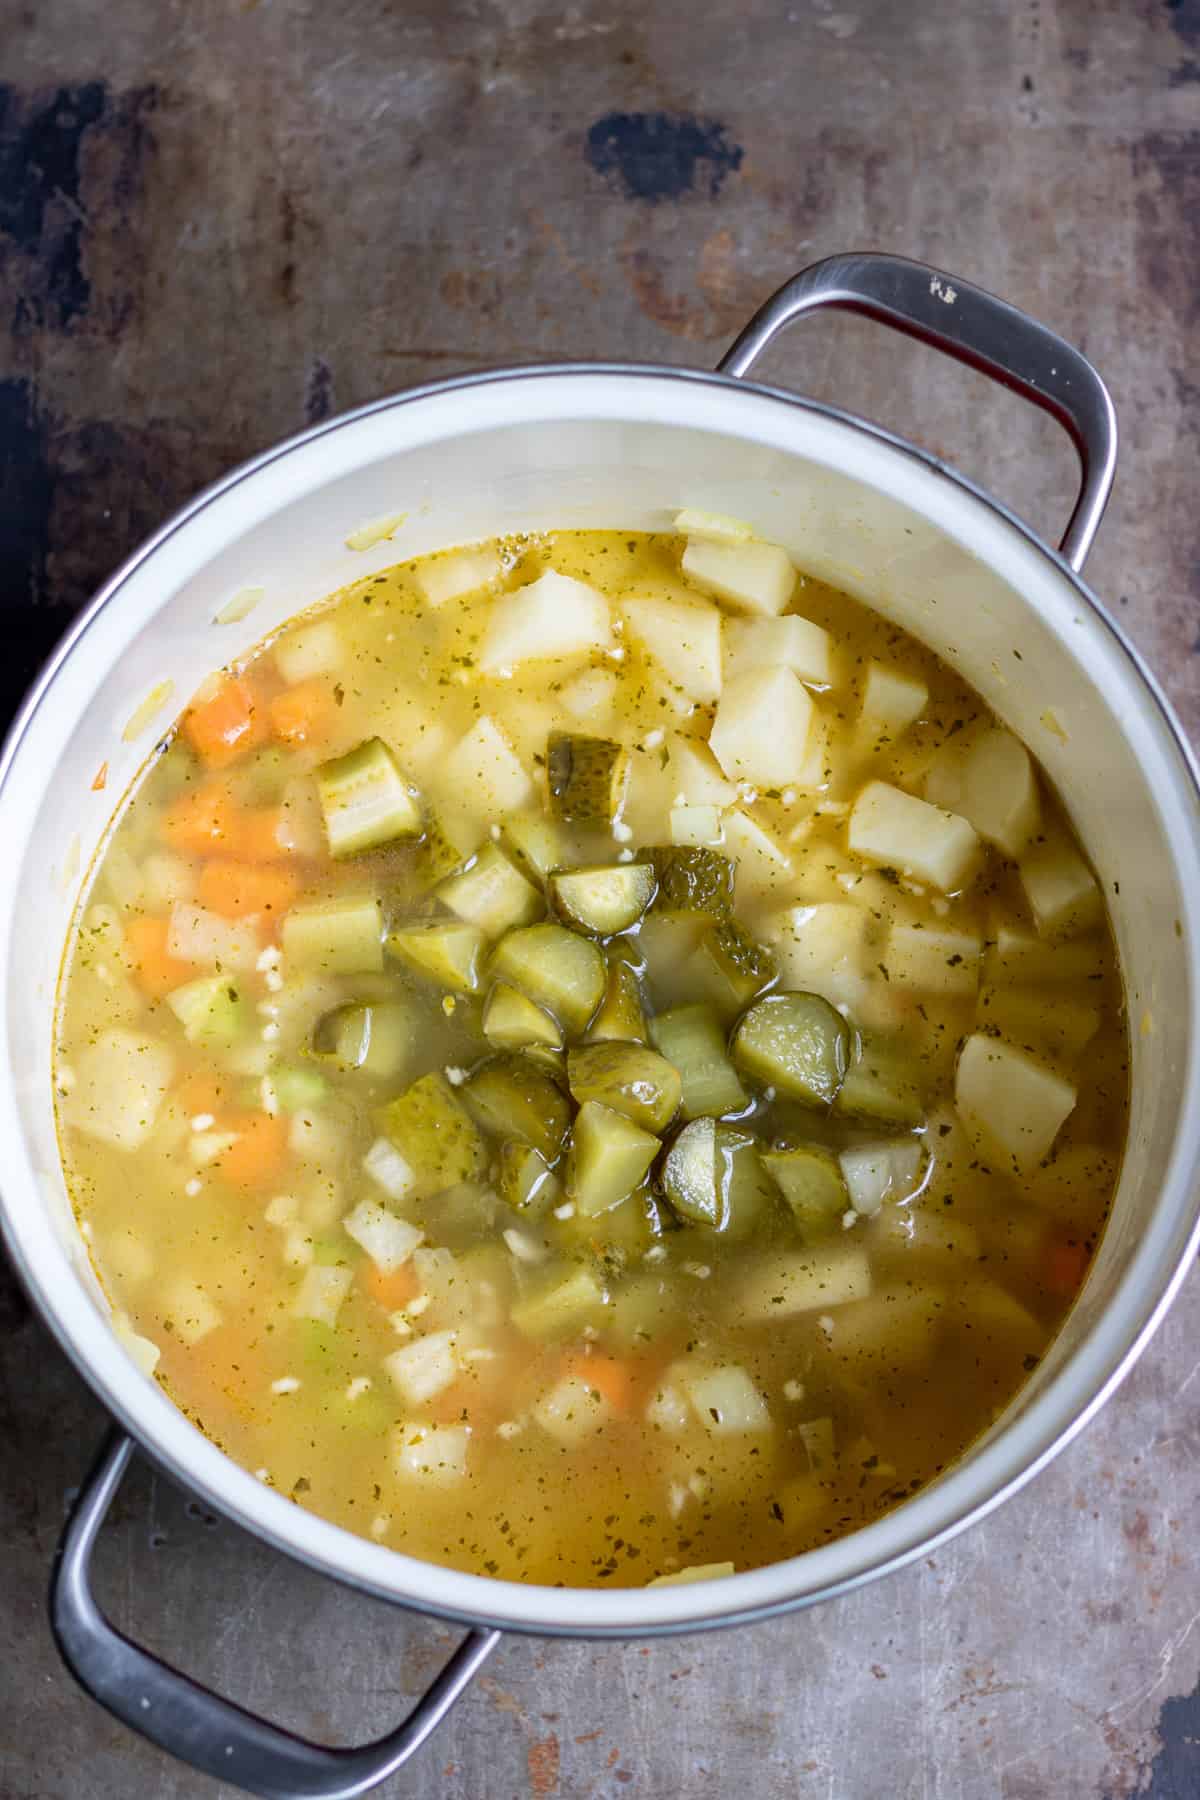 Stock, pickles and potatoes added to the pot.